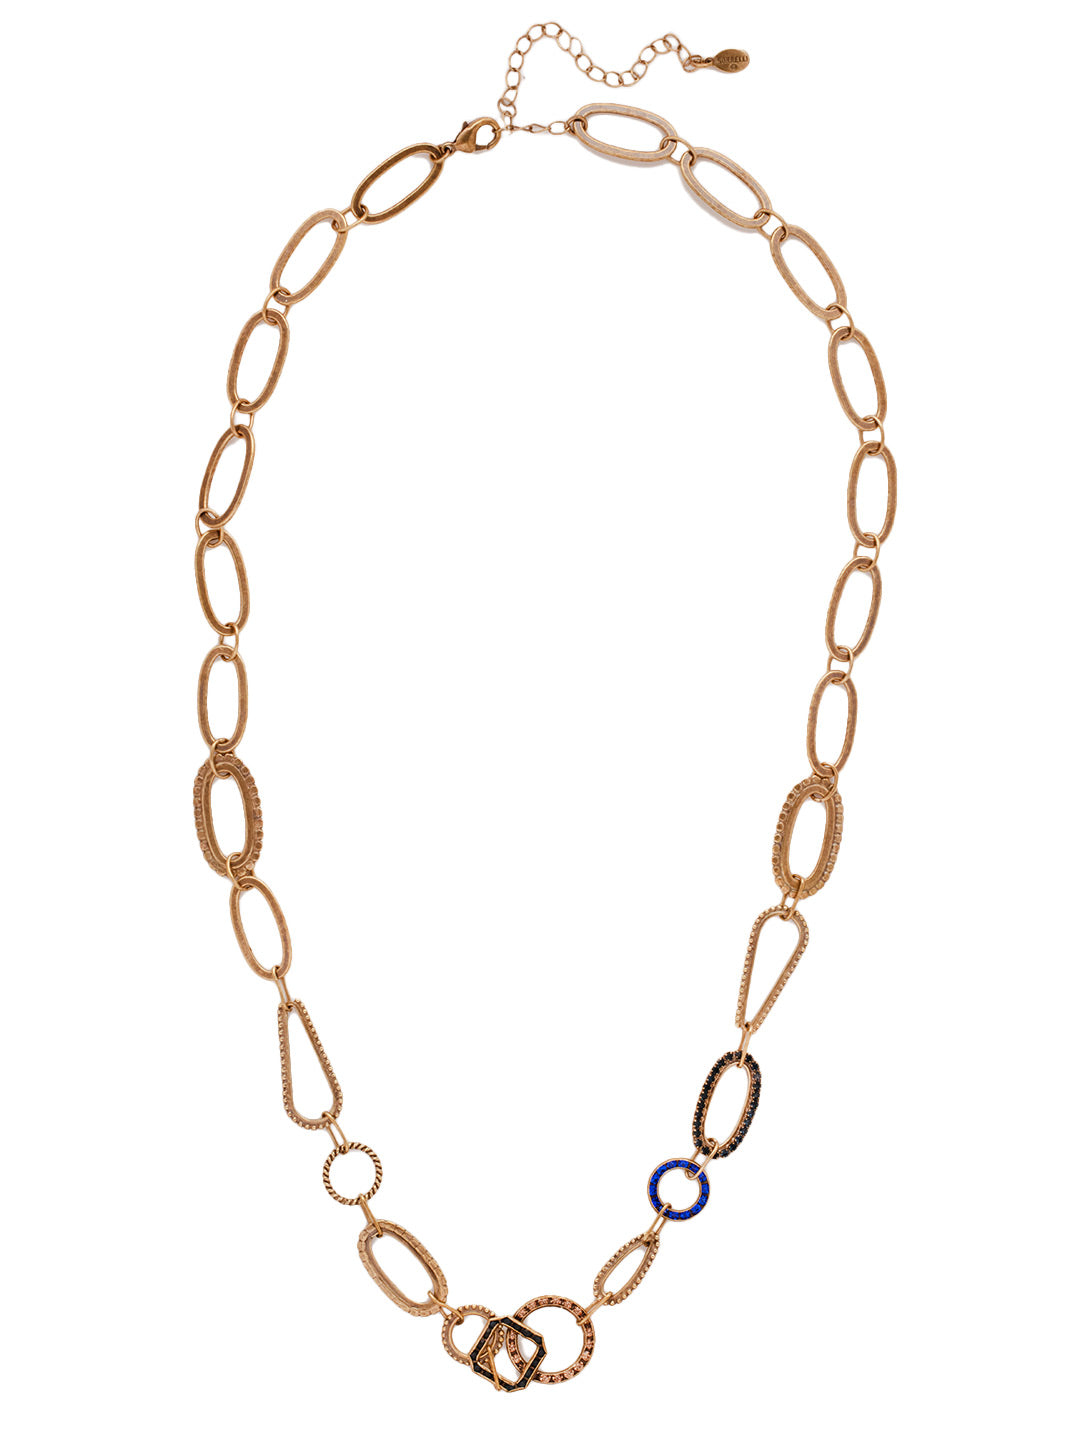 Ramona Long Necklace - NFC1AGVBN - <p>The Ramona Long Necklace features various shapes of rhinestone links, connecting at the base of the neck with an adjustable chain and secured with a lobster claw clasp. From Sorrelli's Venice Blue collection in our Antique Gold-tone finish.</p>